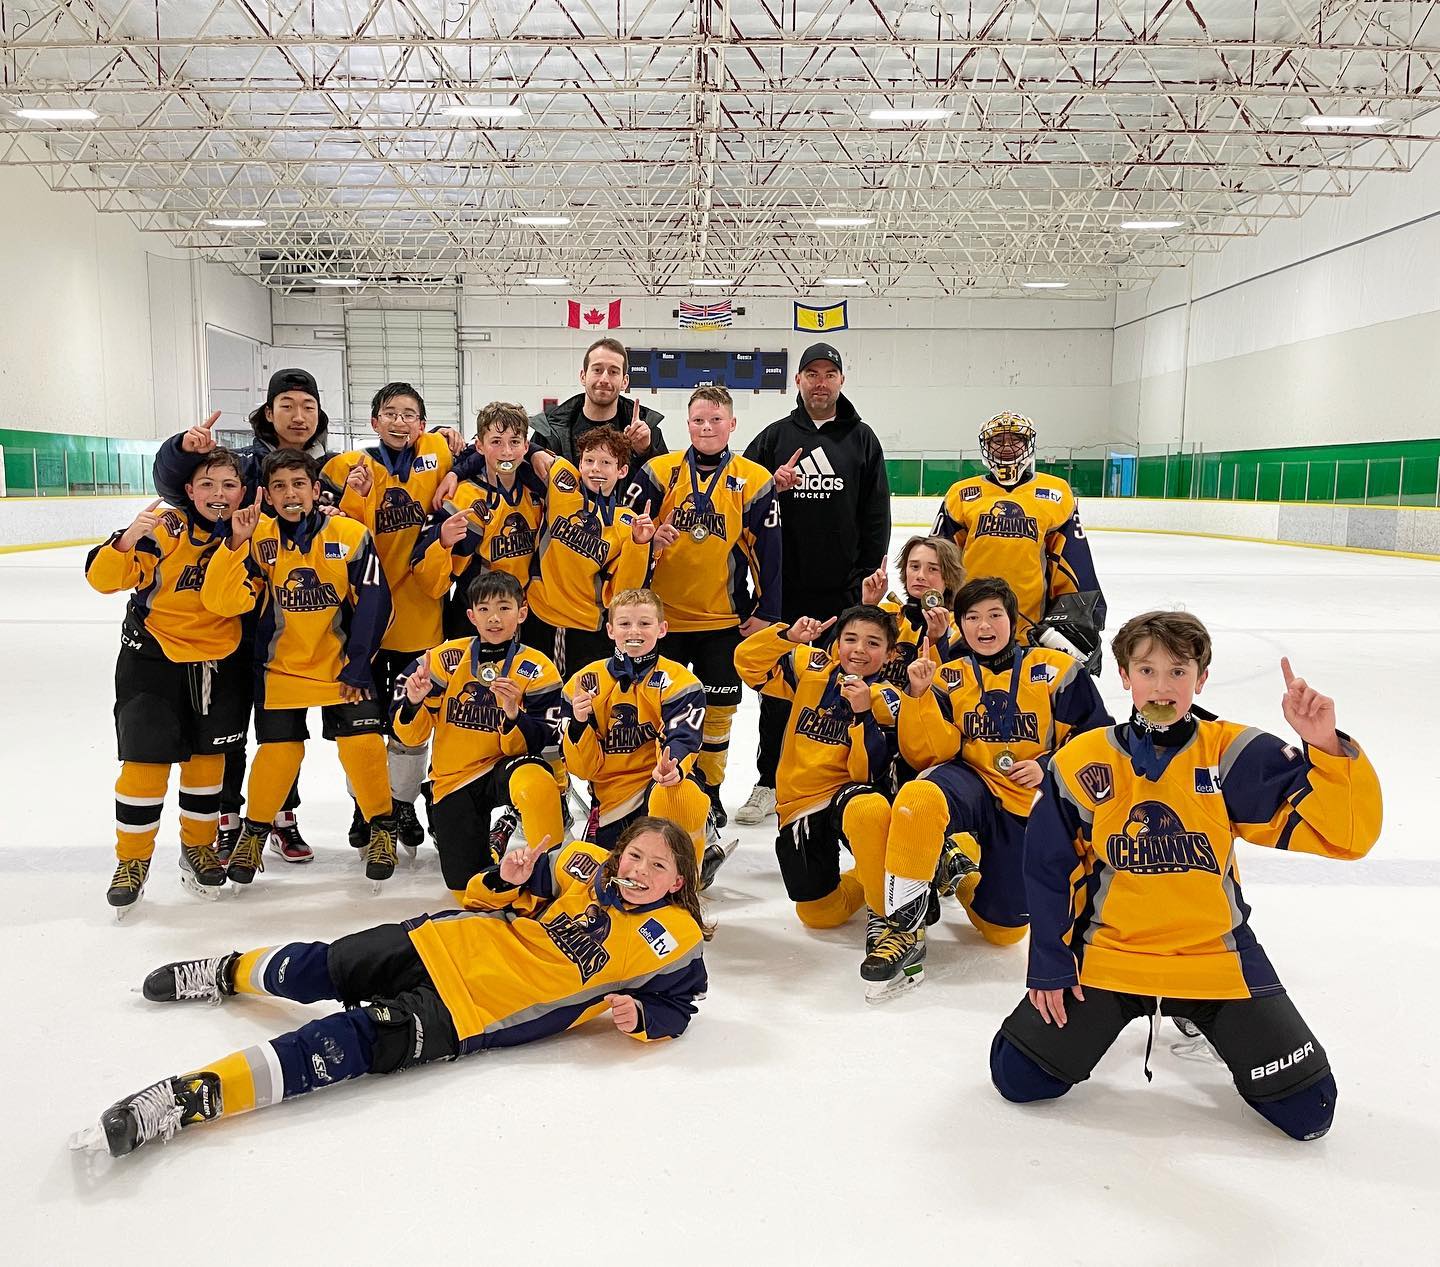 Congrats to our 2010 Jr Delta Ice Hawks, Champions of the AAA division of Steveston Meltdown Tournament!! #DeltaHawkey